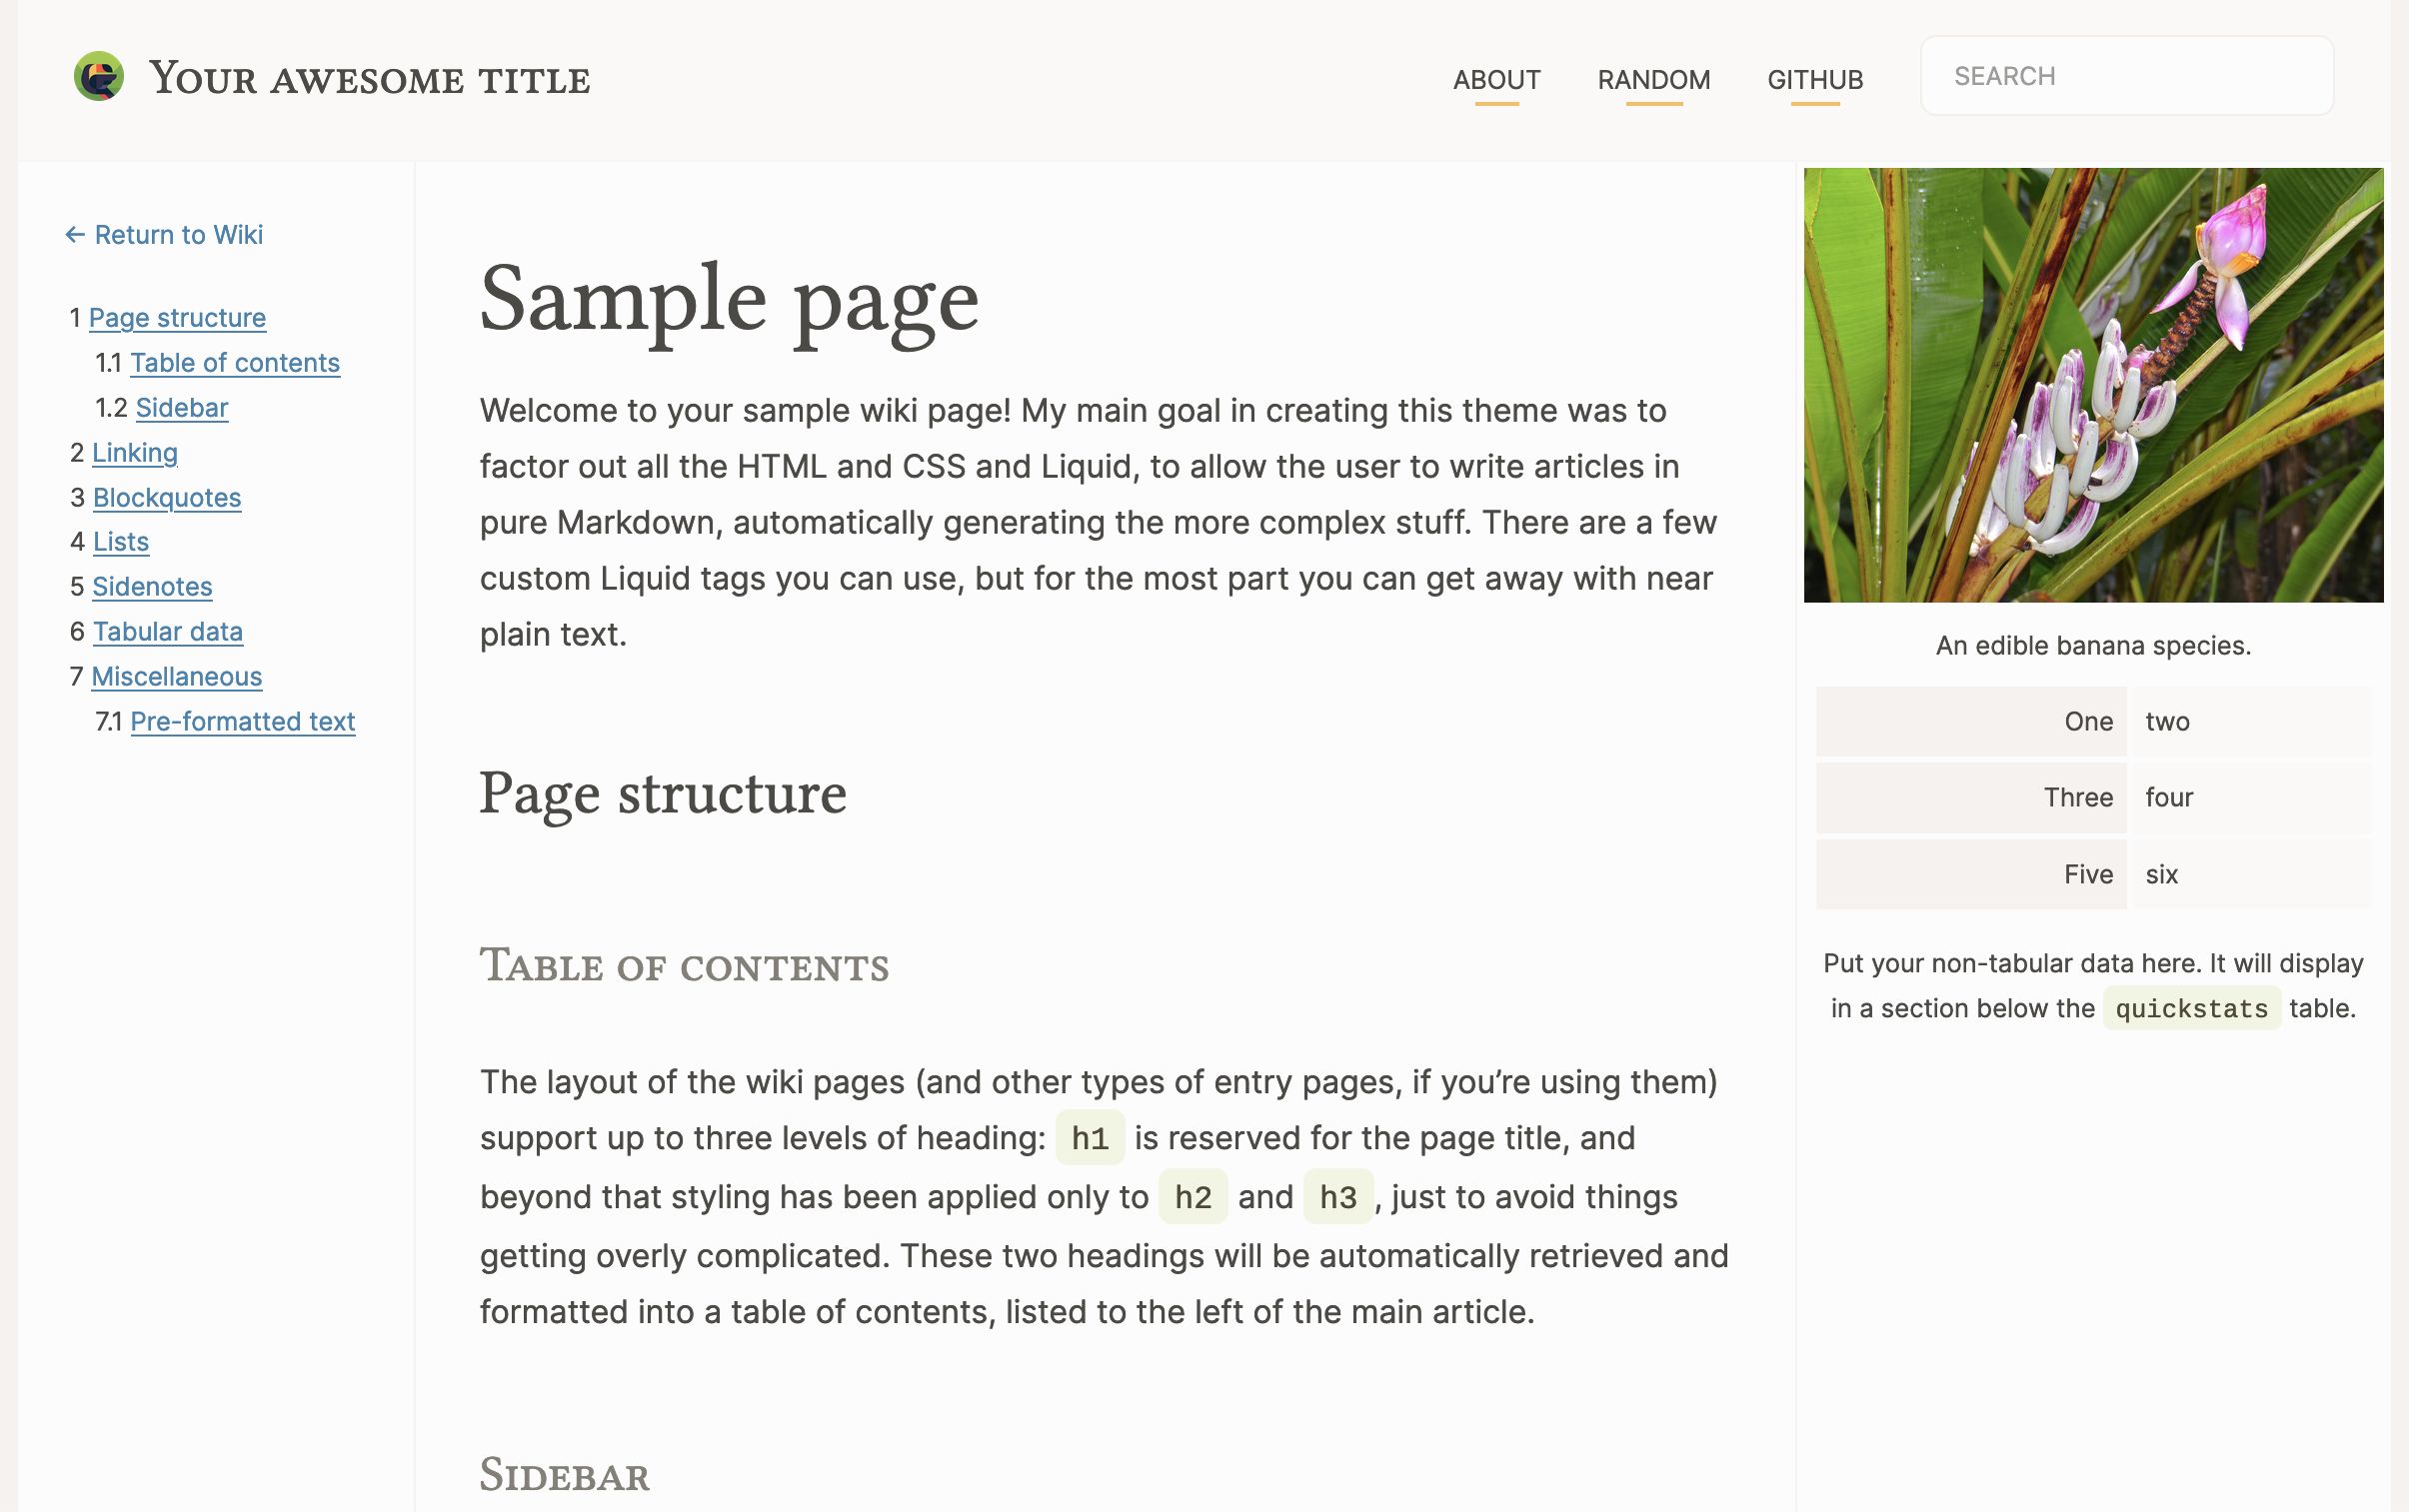 A screenshot of a sample PaperWiki article.